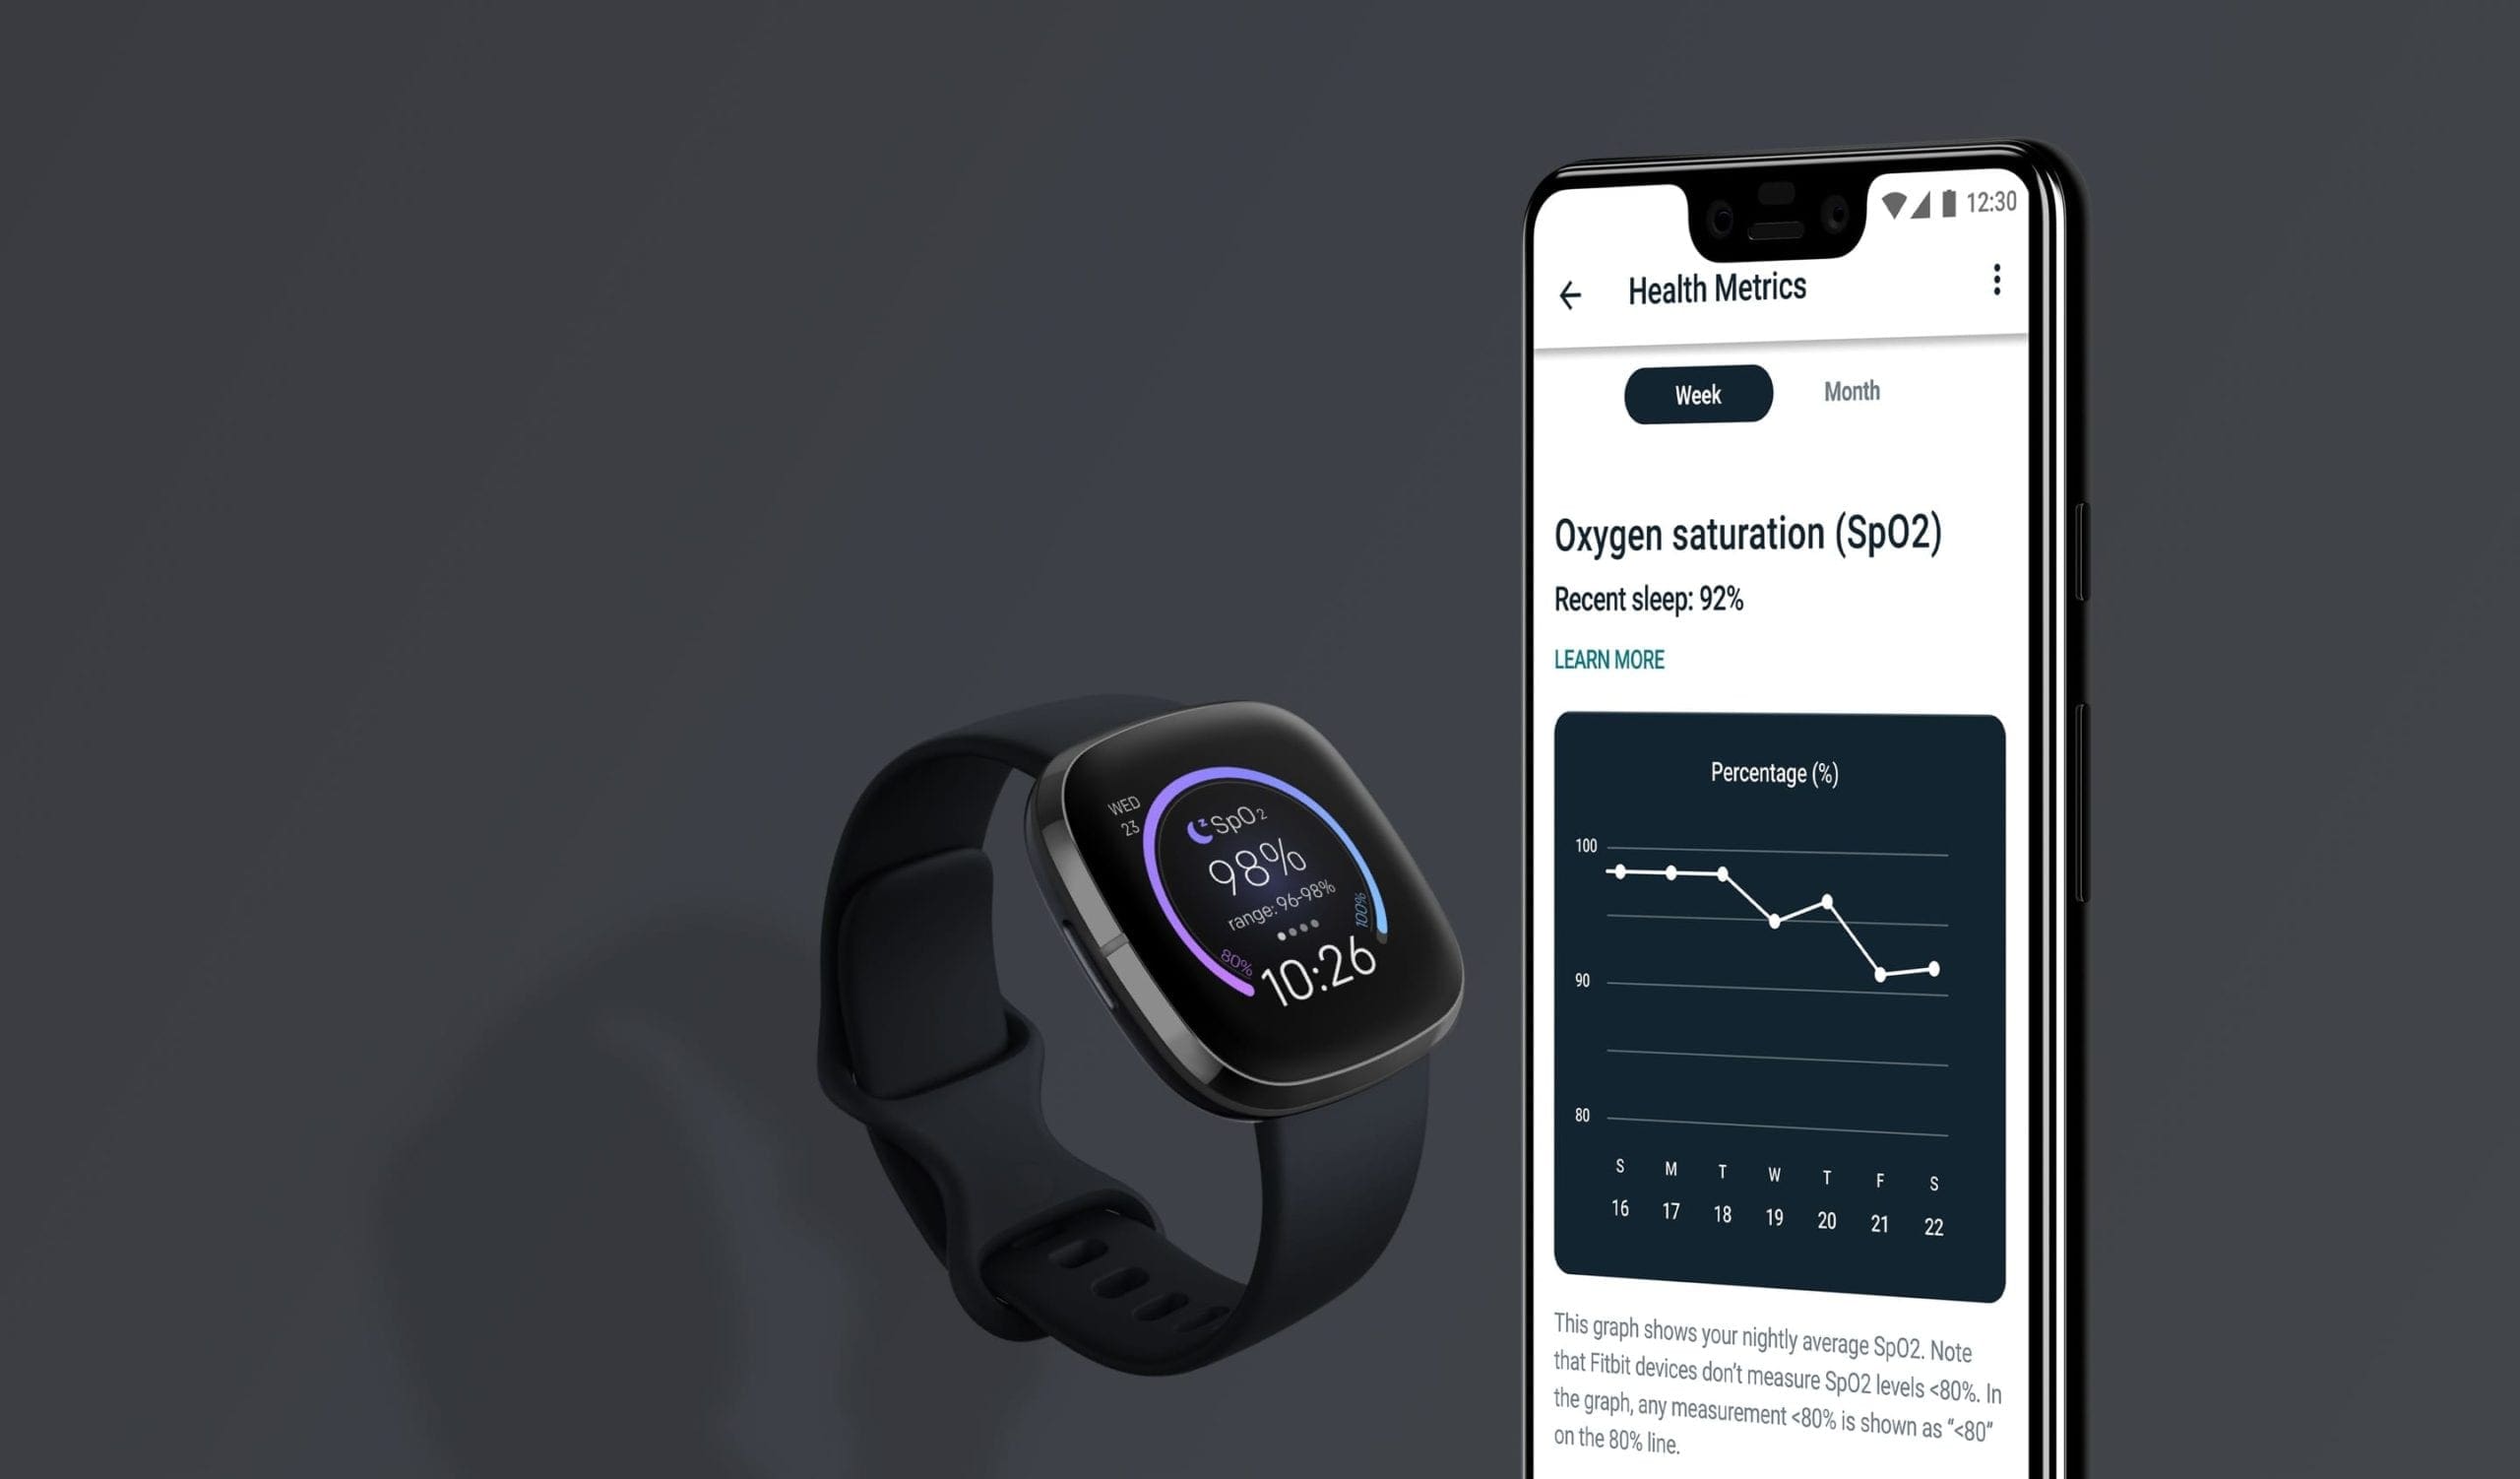 does a fitbit work with an android phone